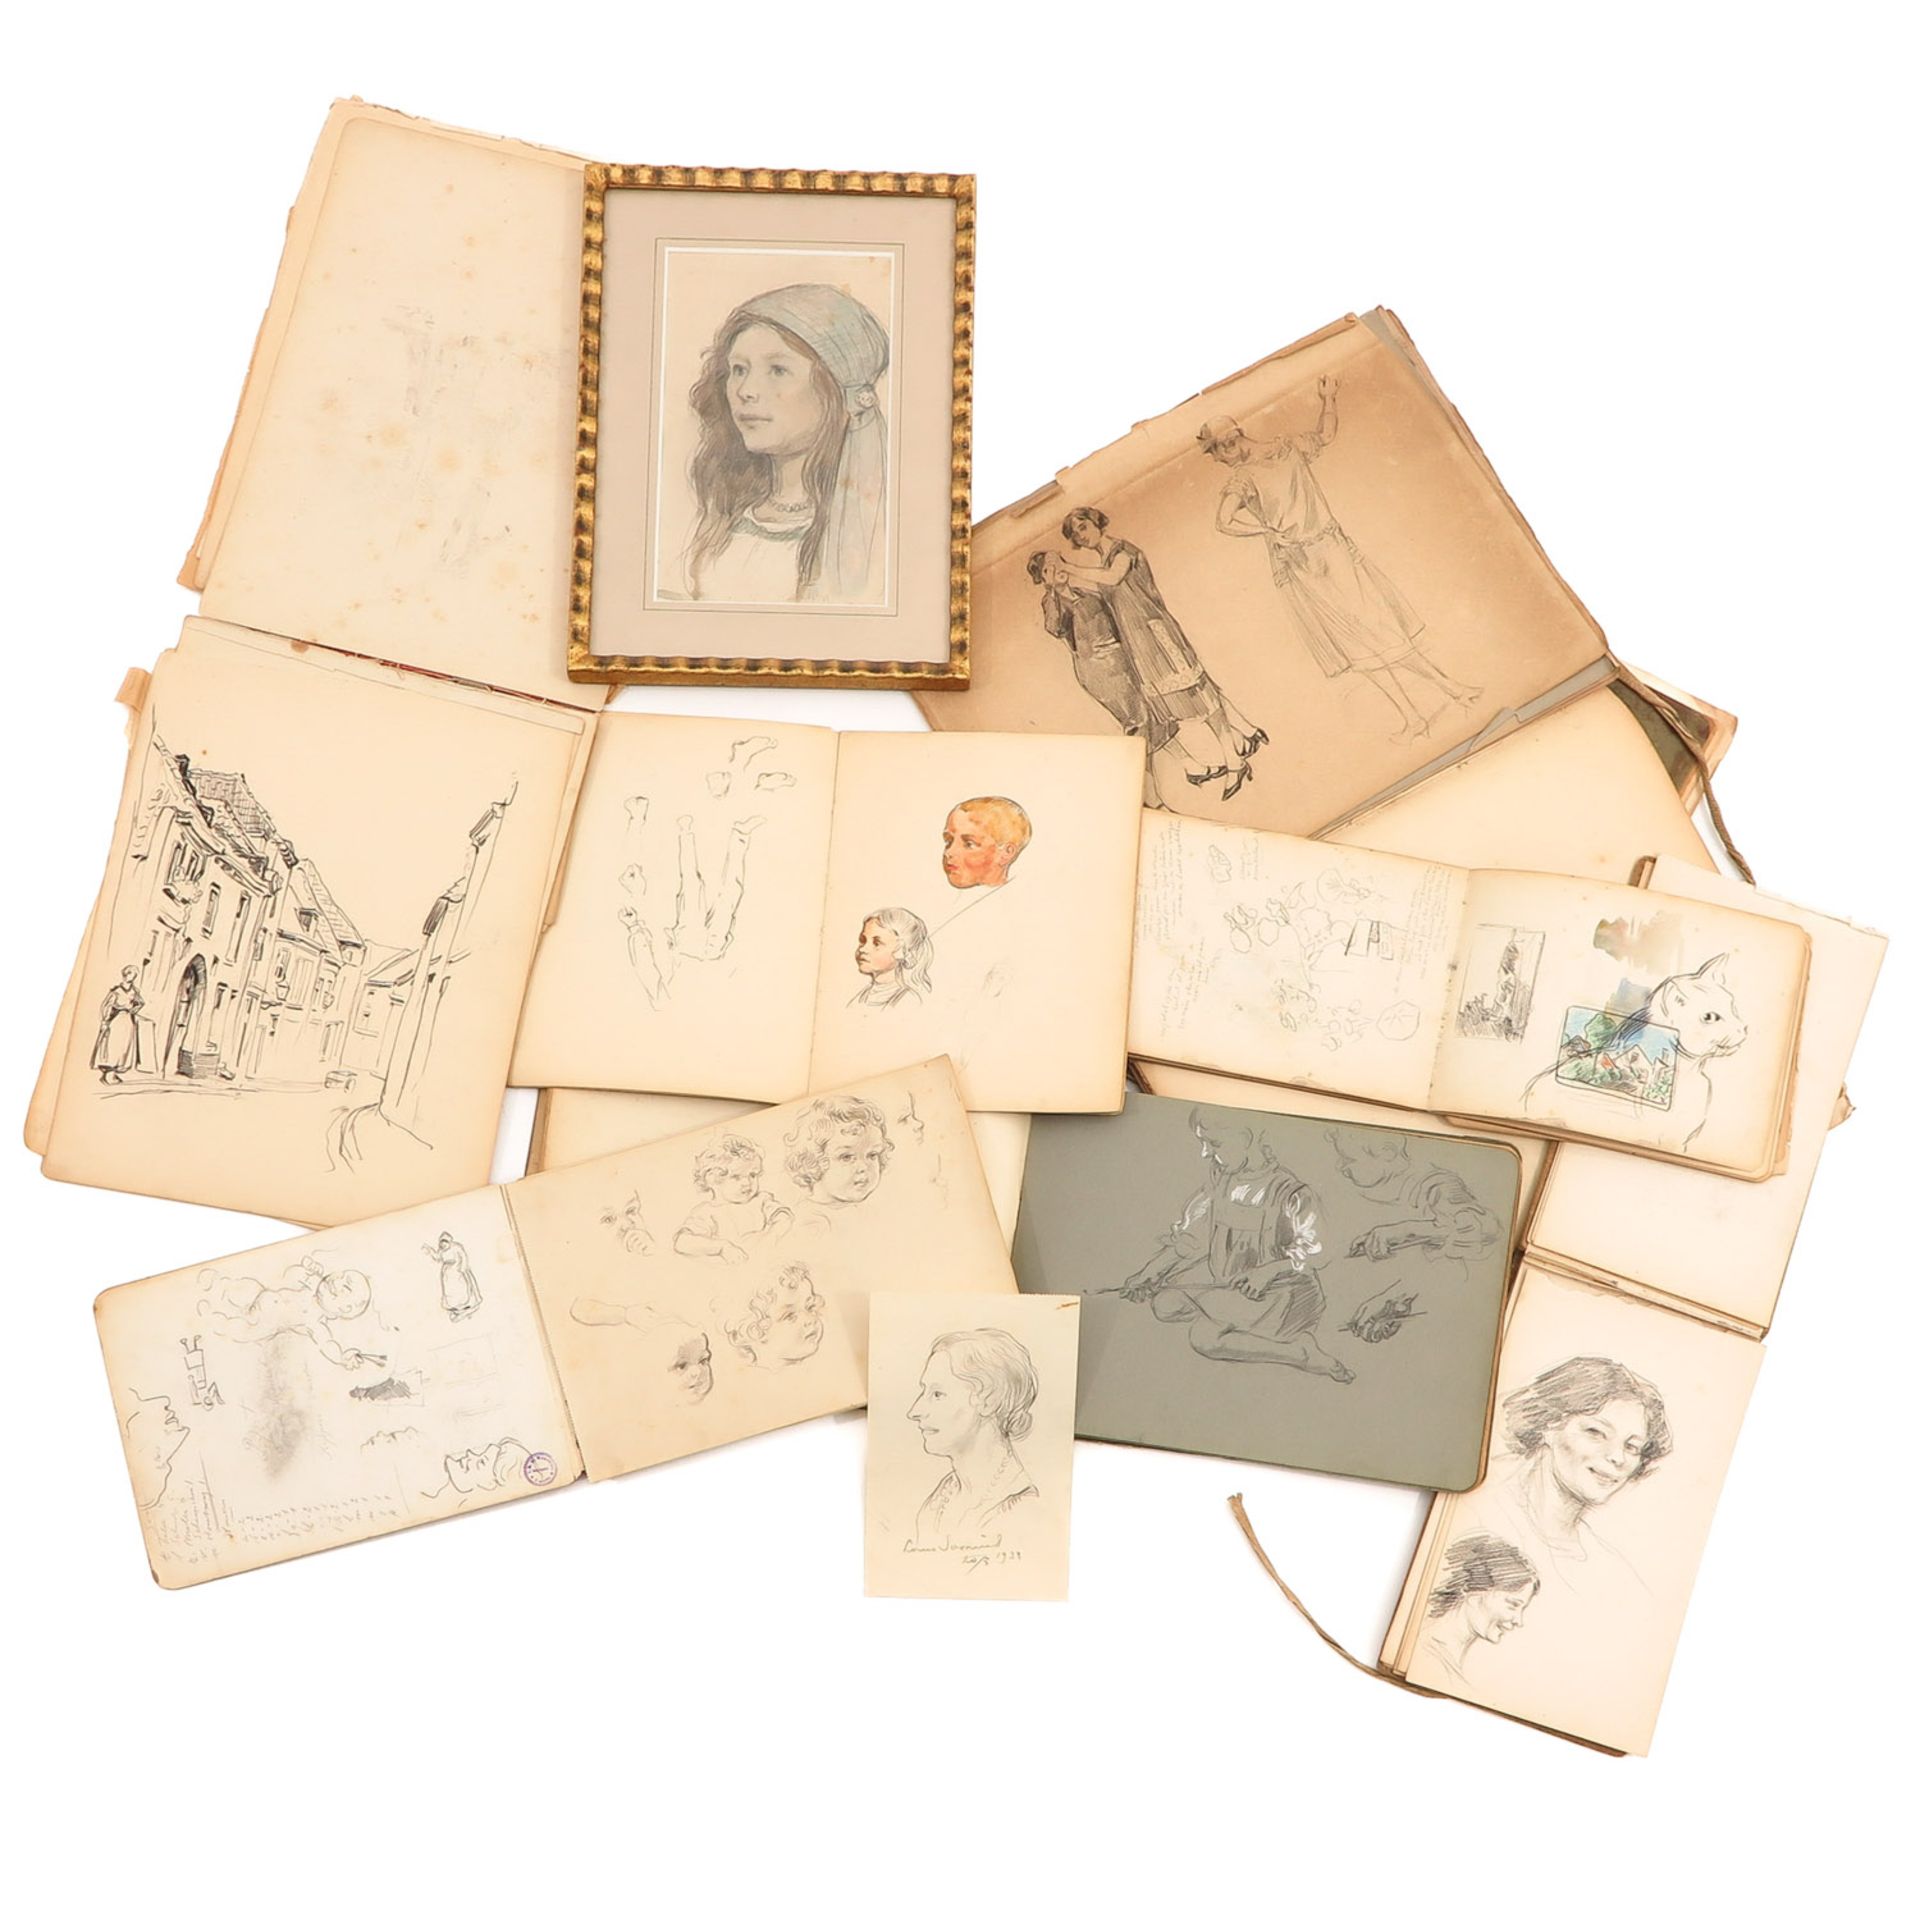 A Drawing and Sketchbook by Louis Soonius